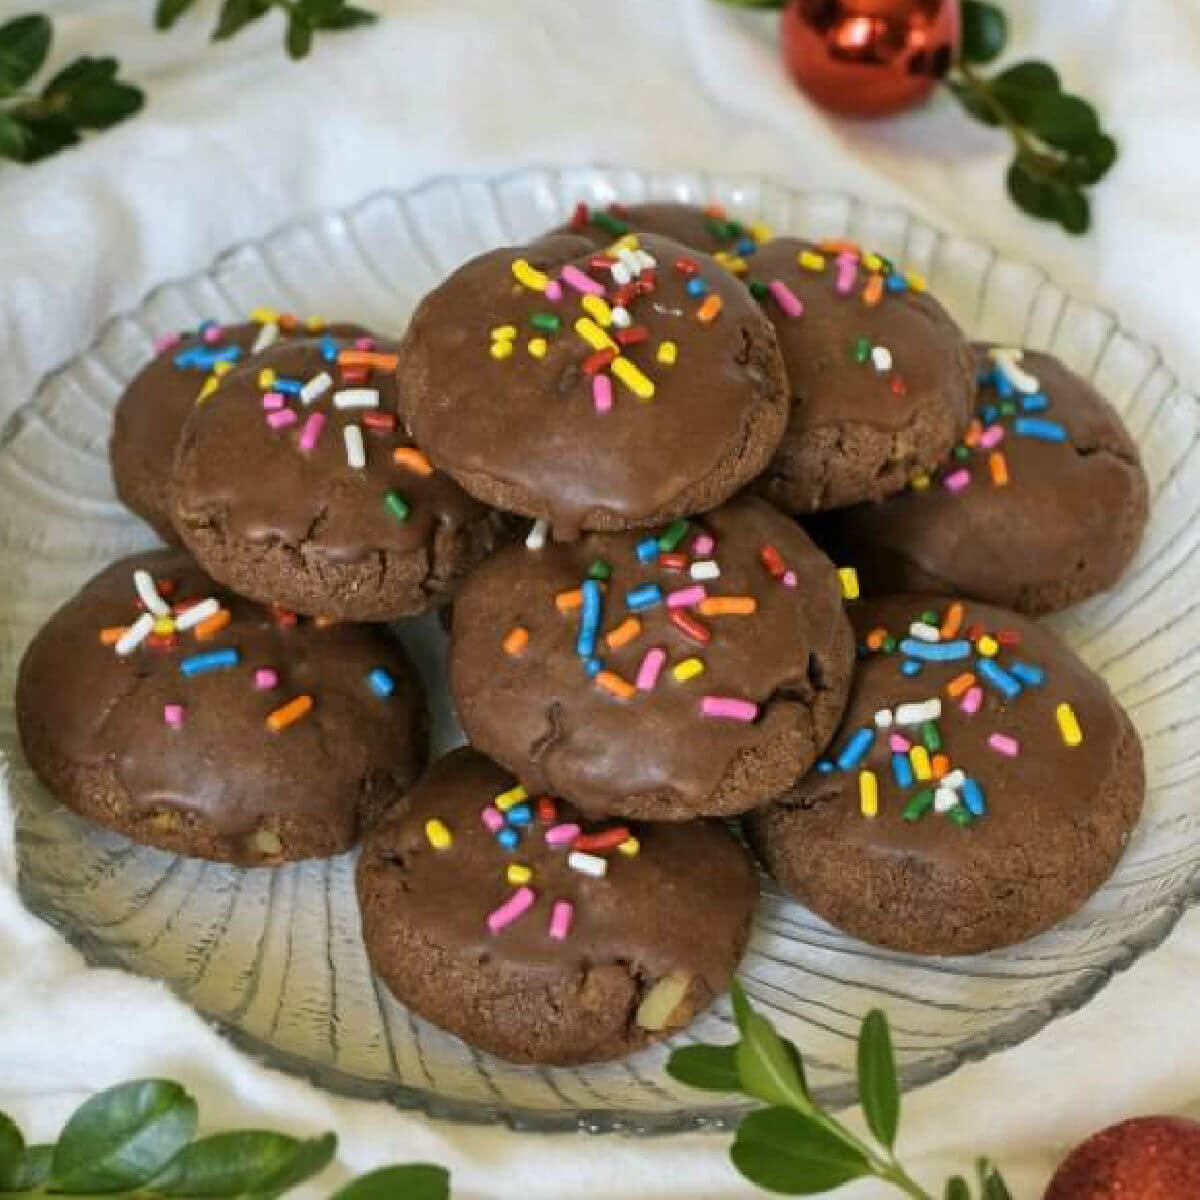 Italian Chocolate Toto Cookies are Christmas spice cookie that's studded with walnuts, chocolate chips, spices, and flavored with orange. Glazed with chocolate and topped with colorful sprinkles.